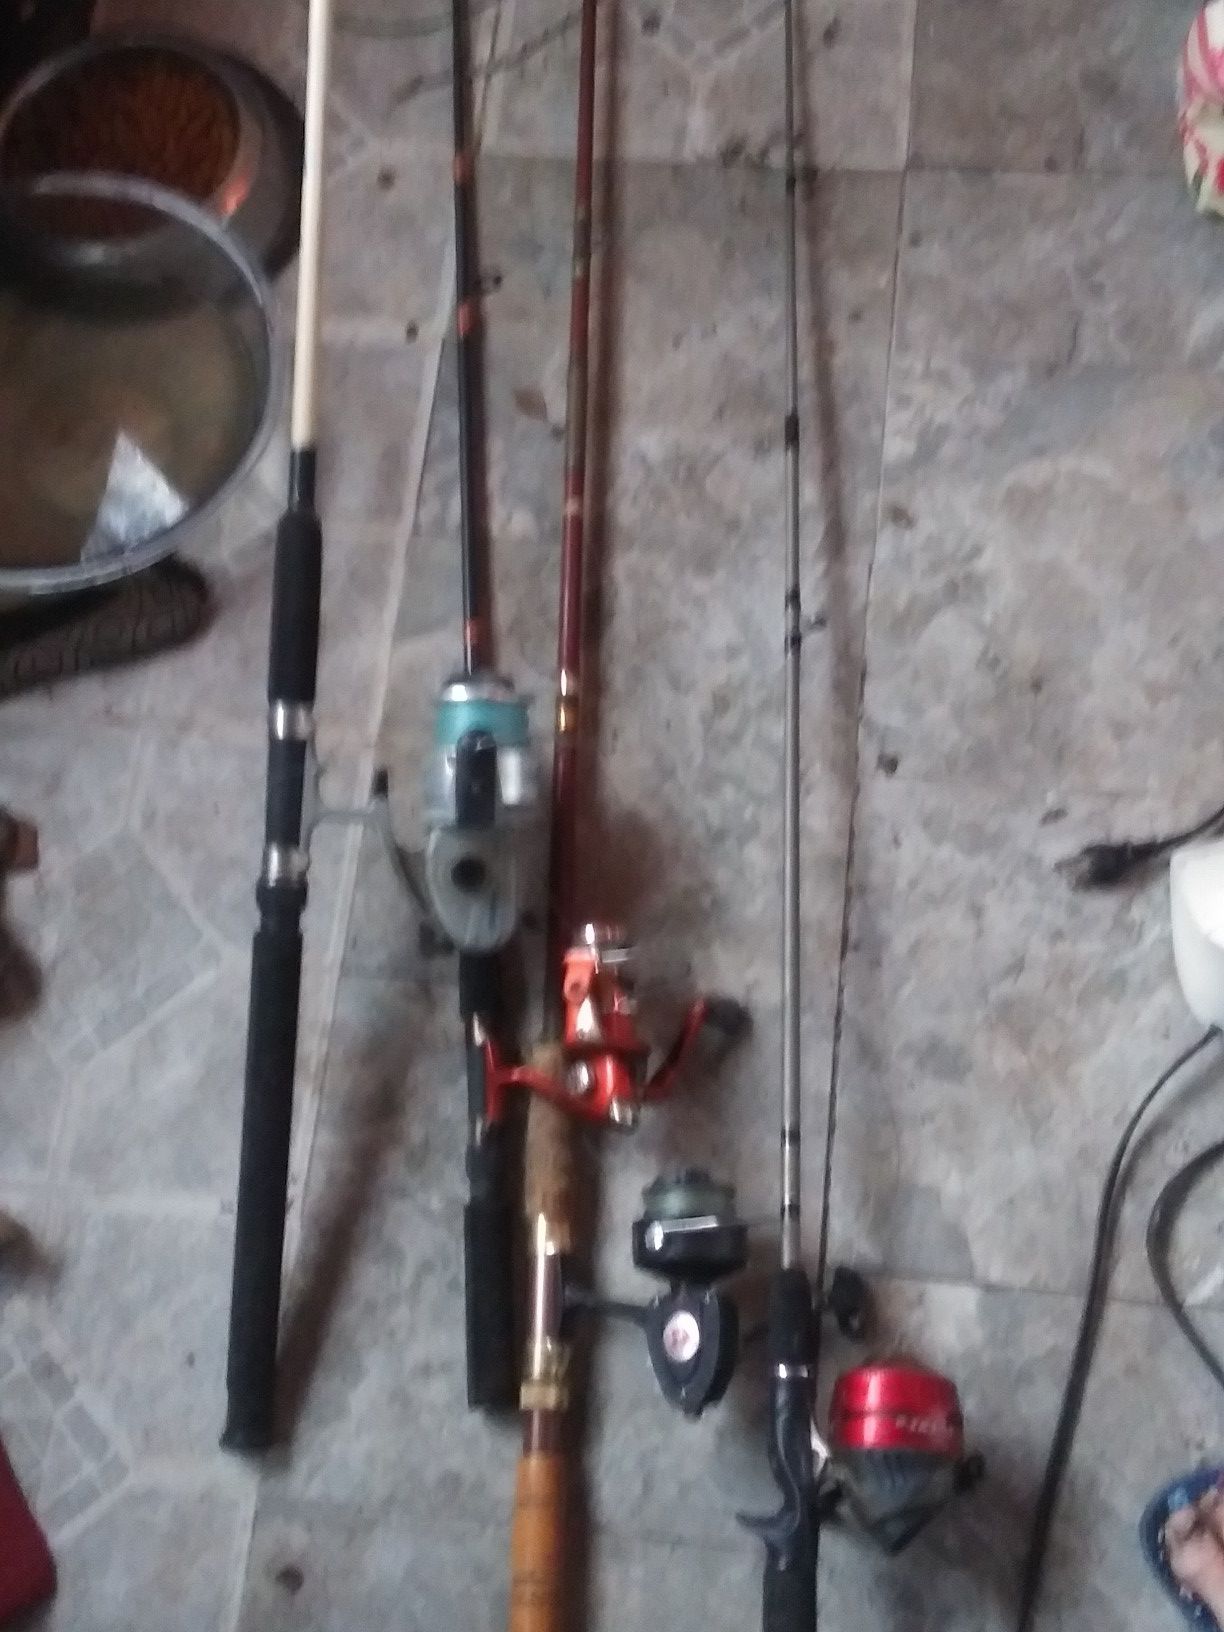 Fishing poles (2 saltwater) 30 for all 5